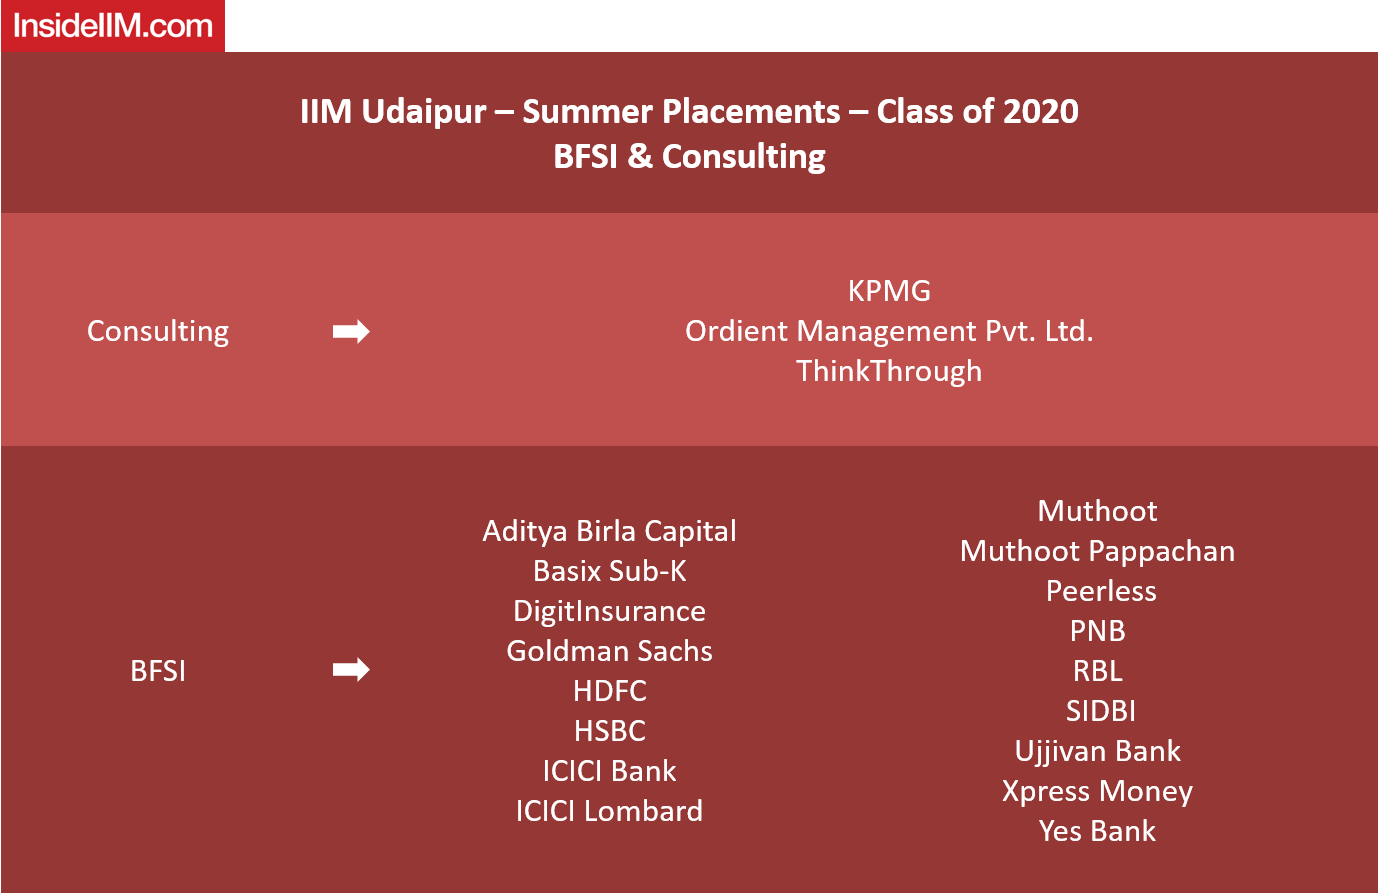 IIM Udaipur Placements 2019 - companies: BFSI & Consulting